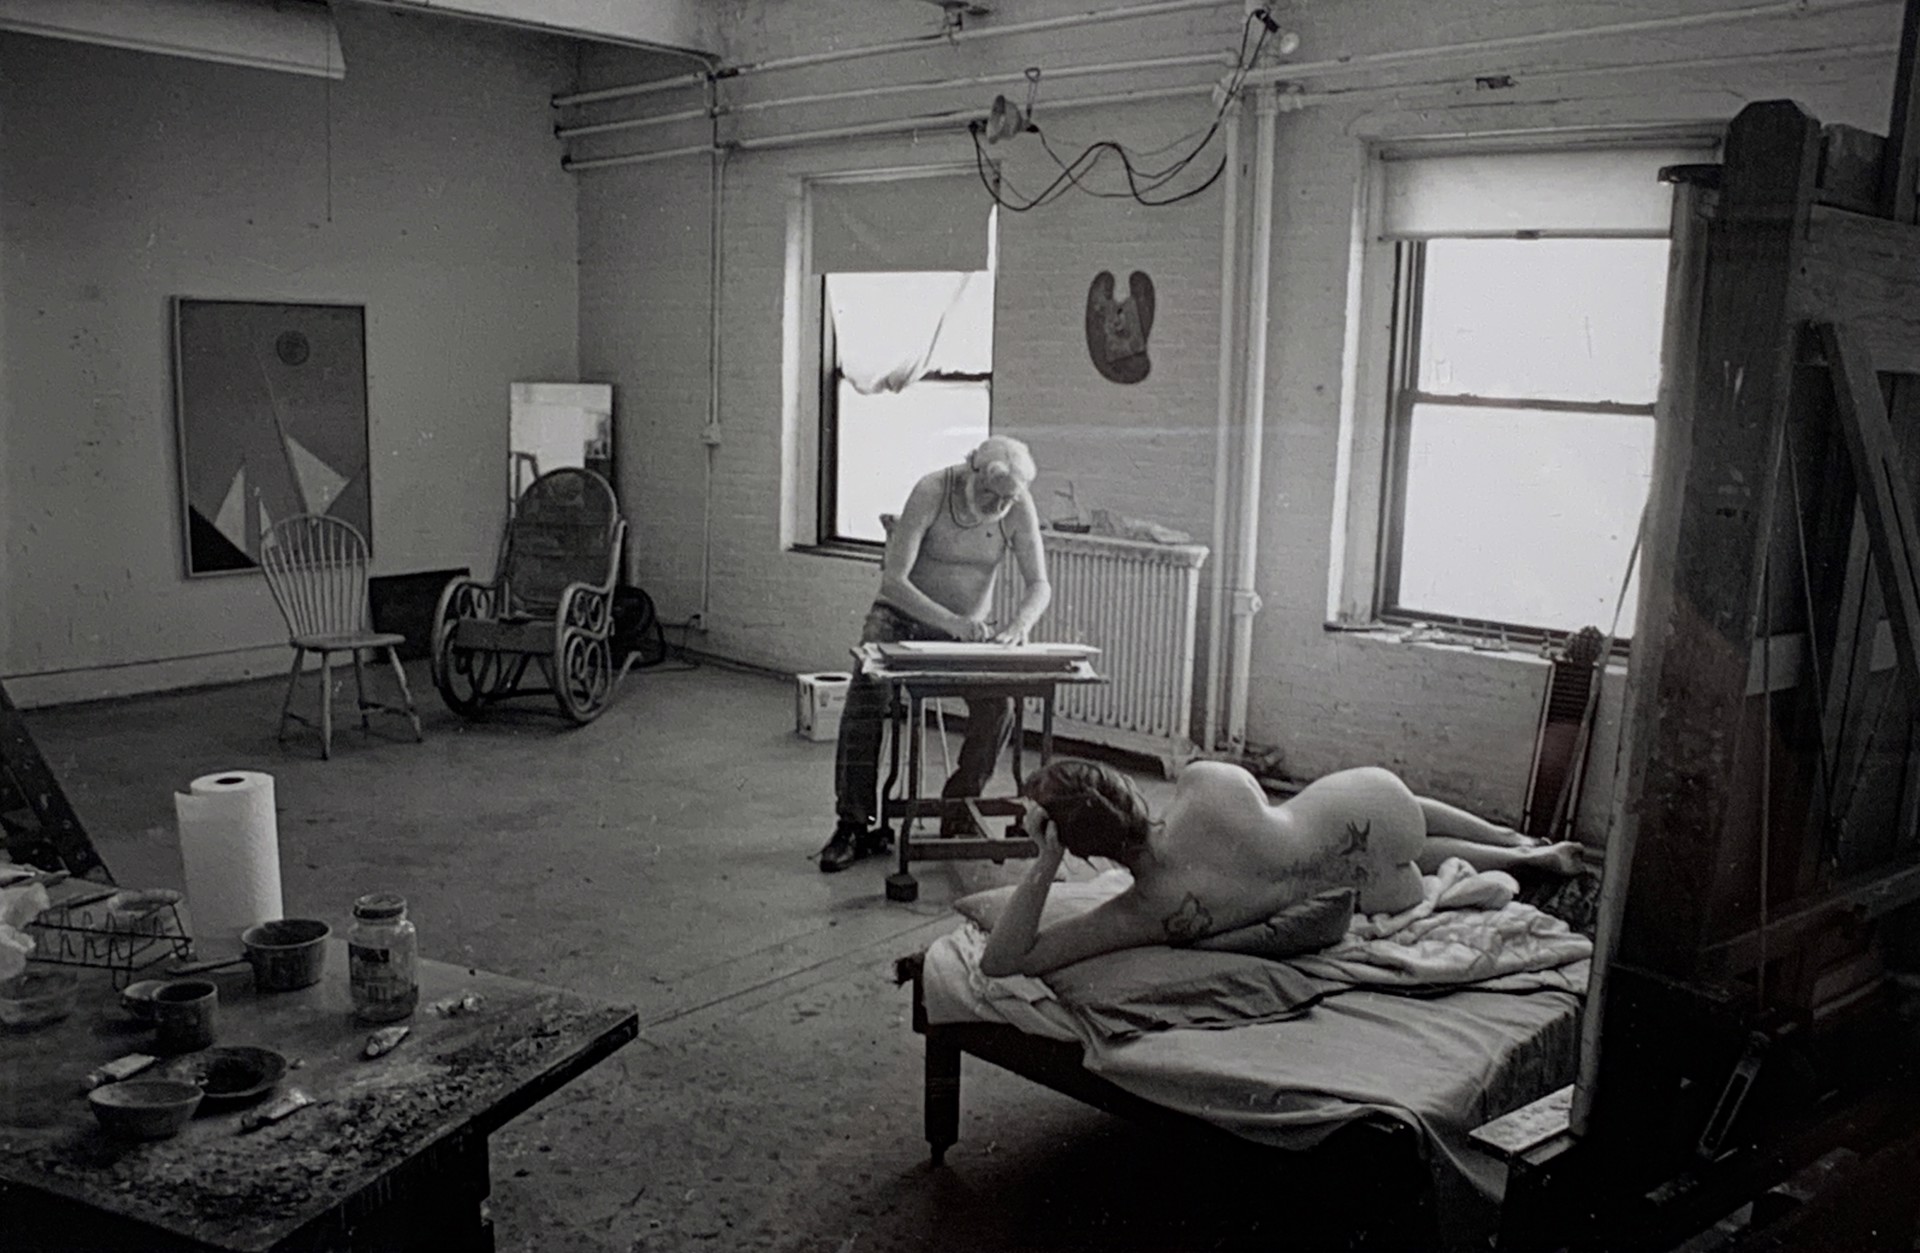 Studio, New York (Model with Tattoos), 2010 by Blair Resika